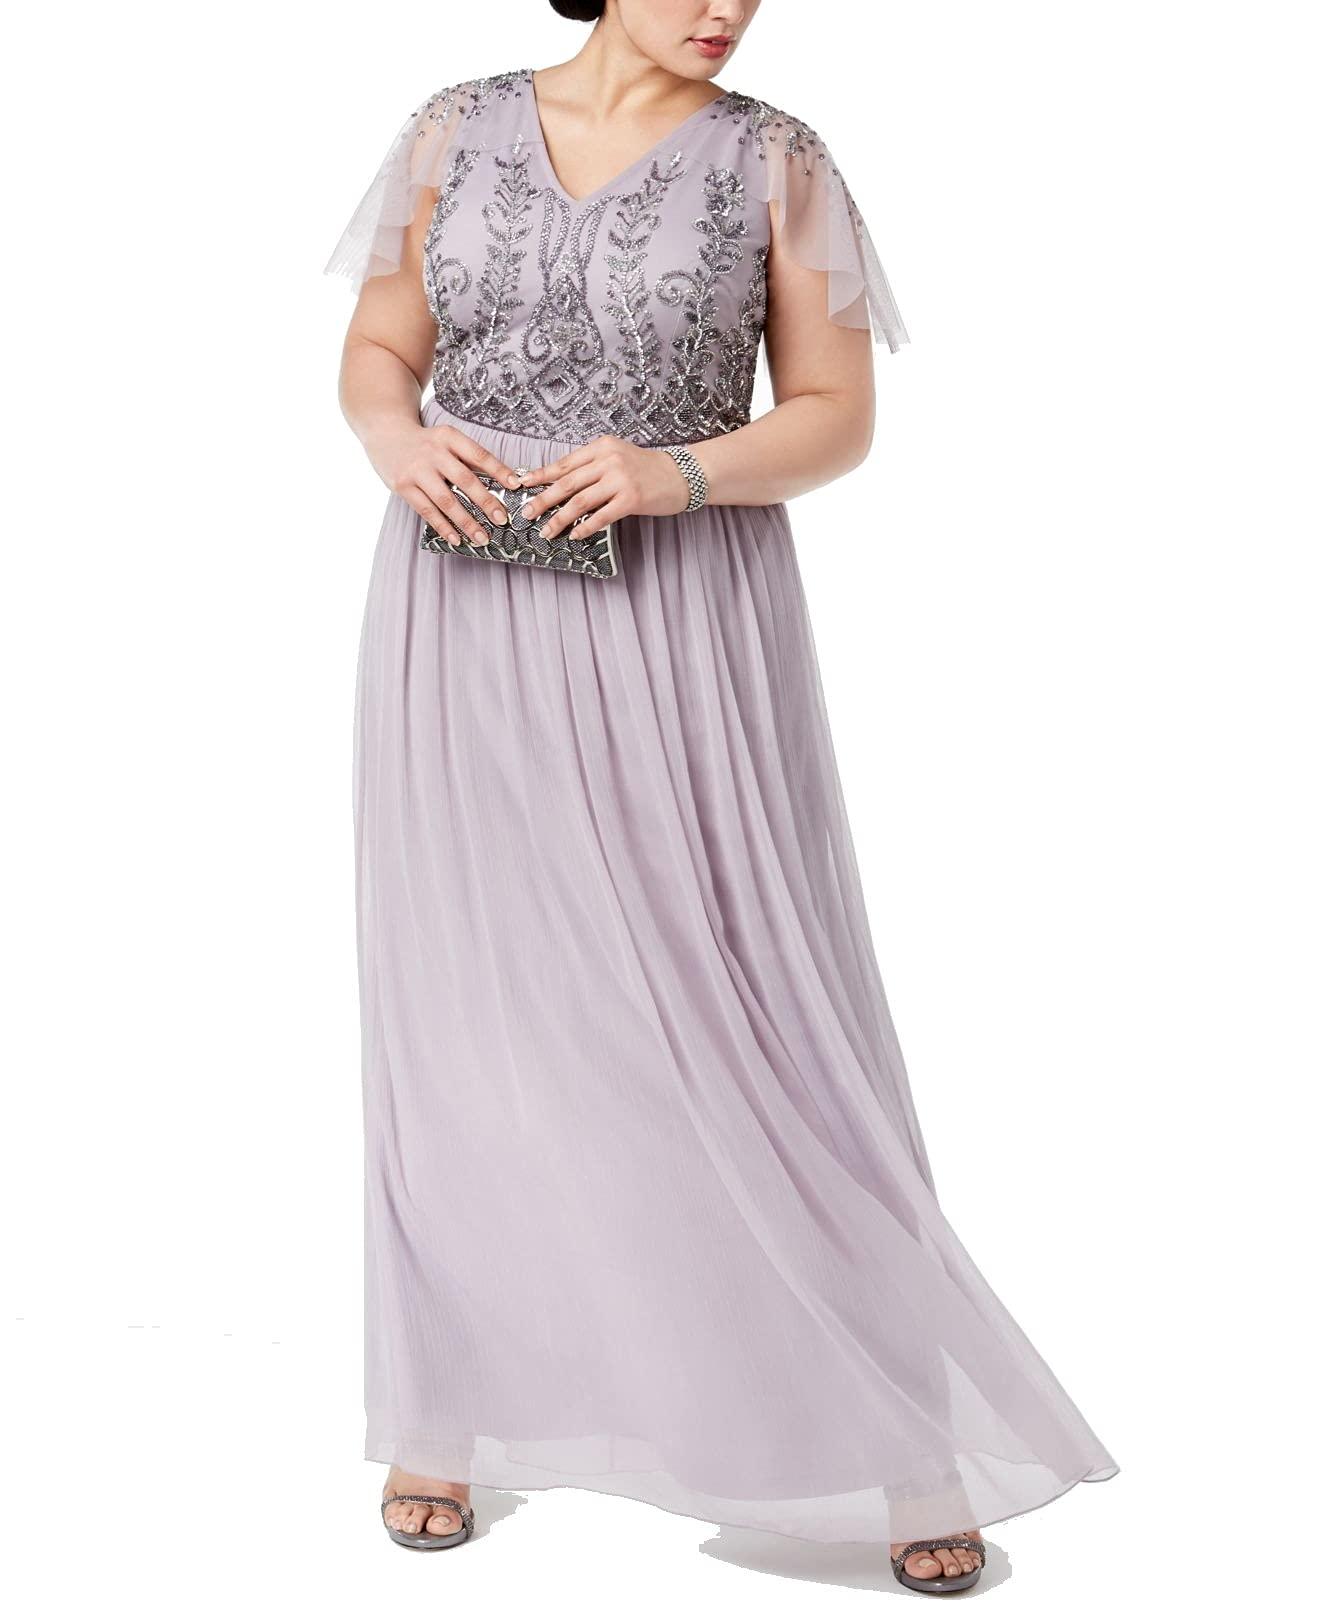 Adrianna Papell Synthetic Plus Size Beaded Gown in Lilac Grey (Purple) -  Save 61% - Lyst